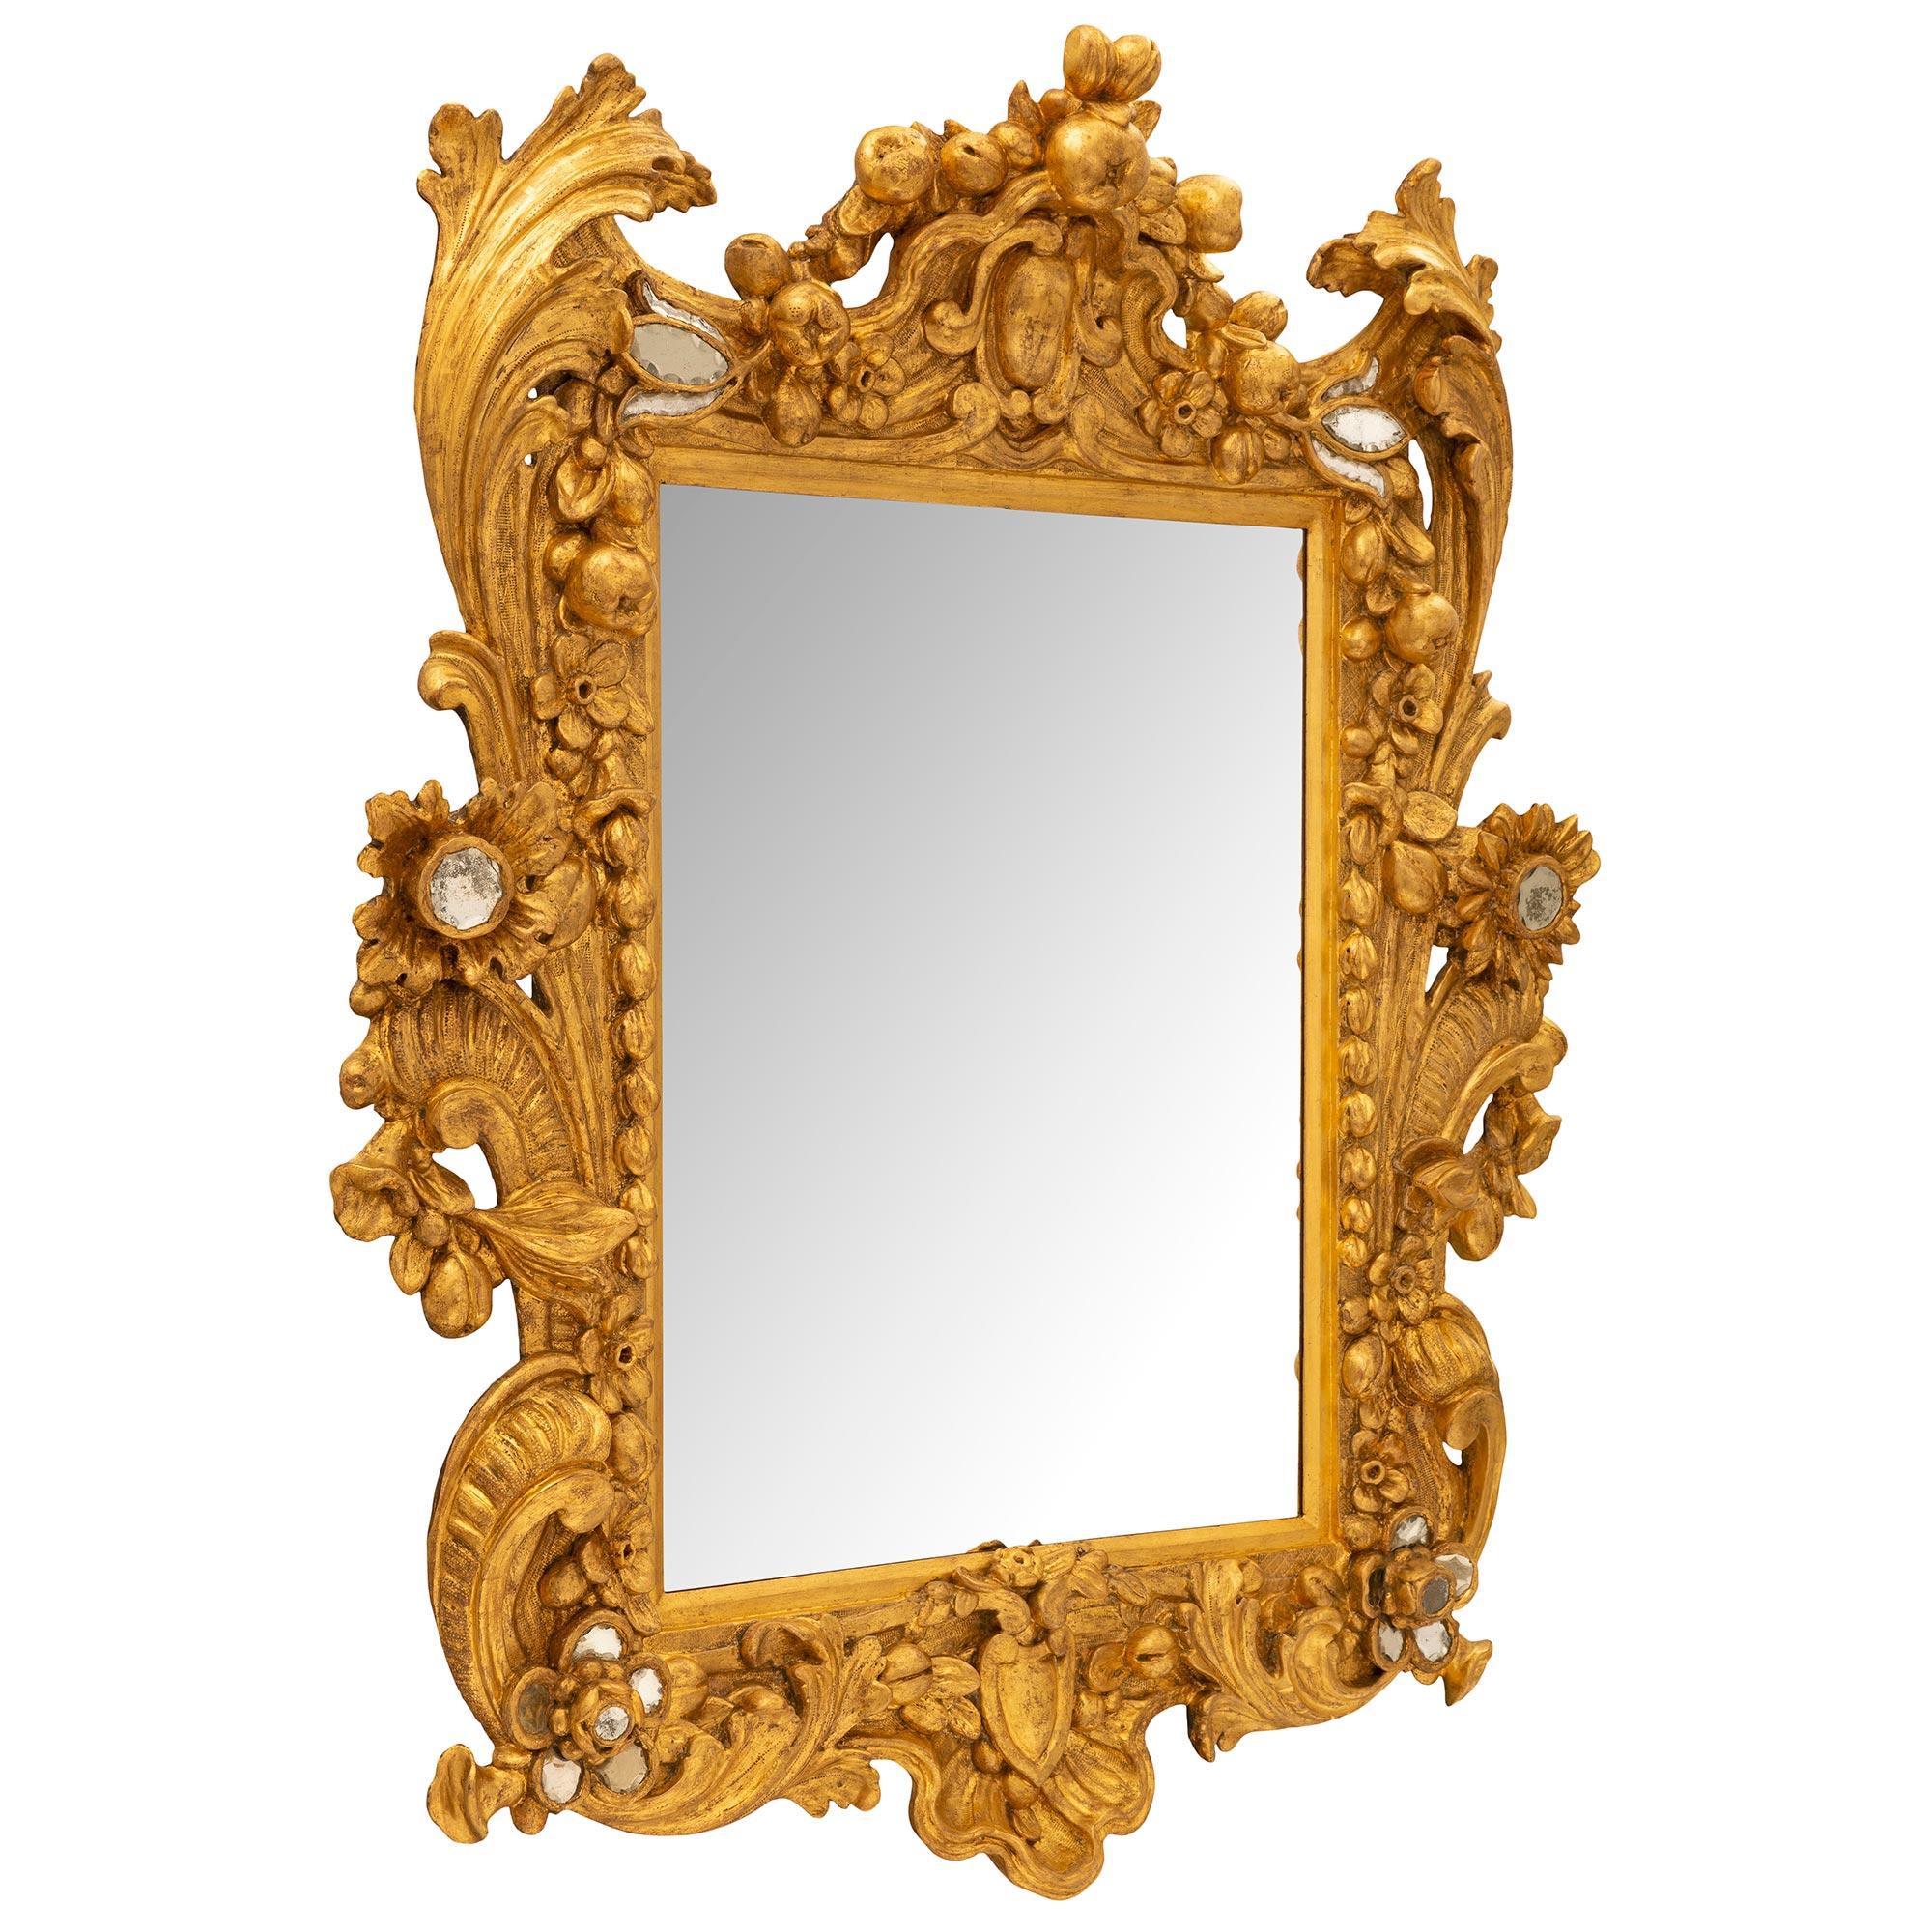 Italian Early 18th Century Baroque Period Giltwood and Cut Glass Mirror In Good Condition For Sale In West Palm Beach, FL